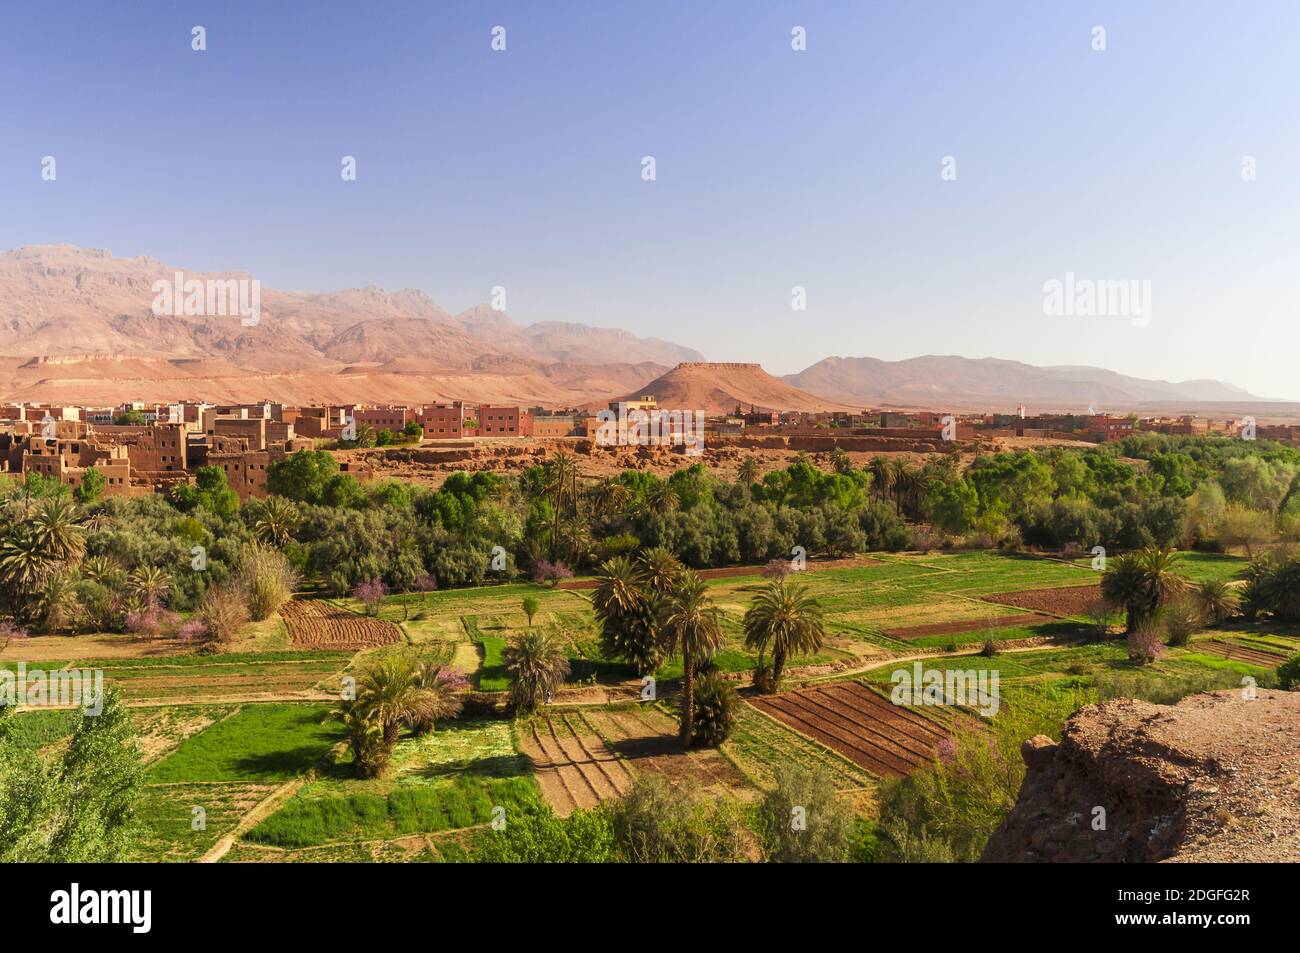 Kasbahs in Dade valley in the south of Morocco, Africa. Stock Photo